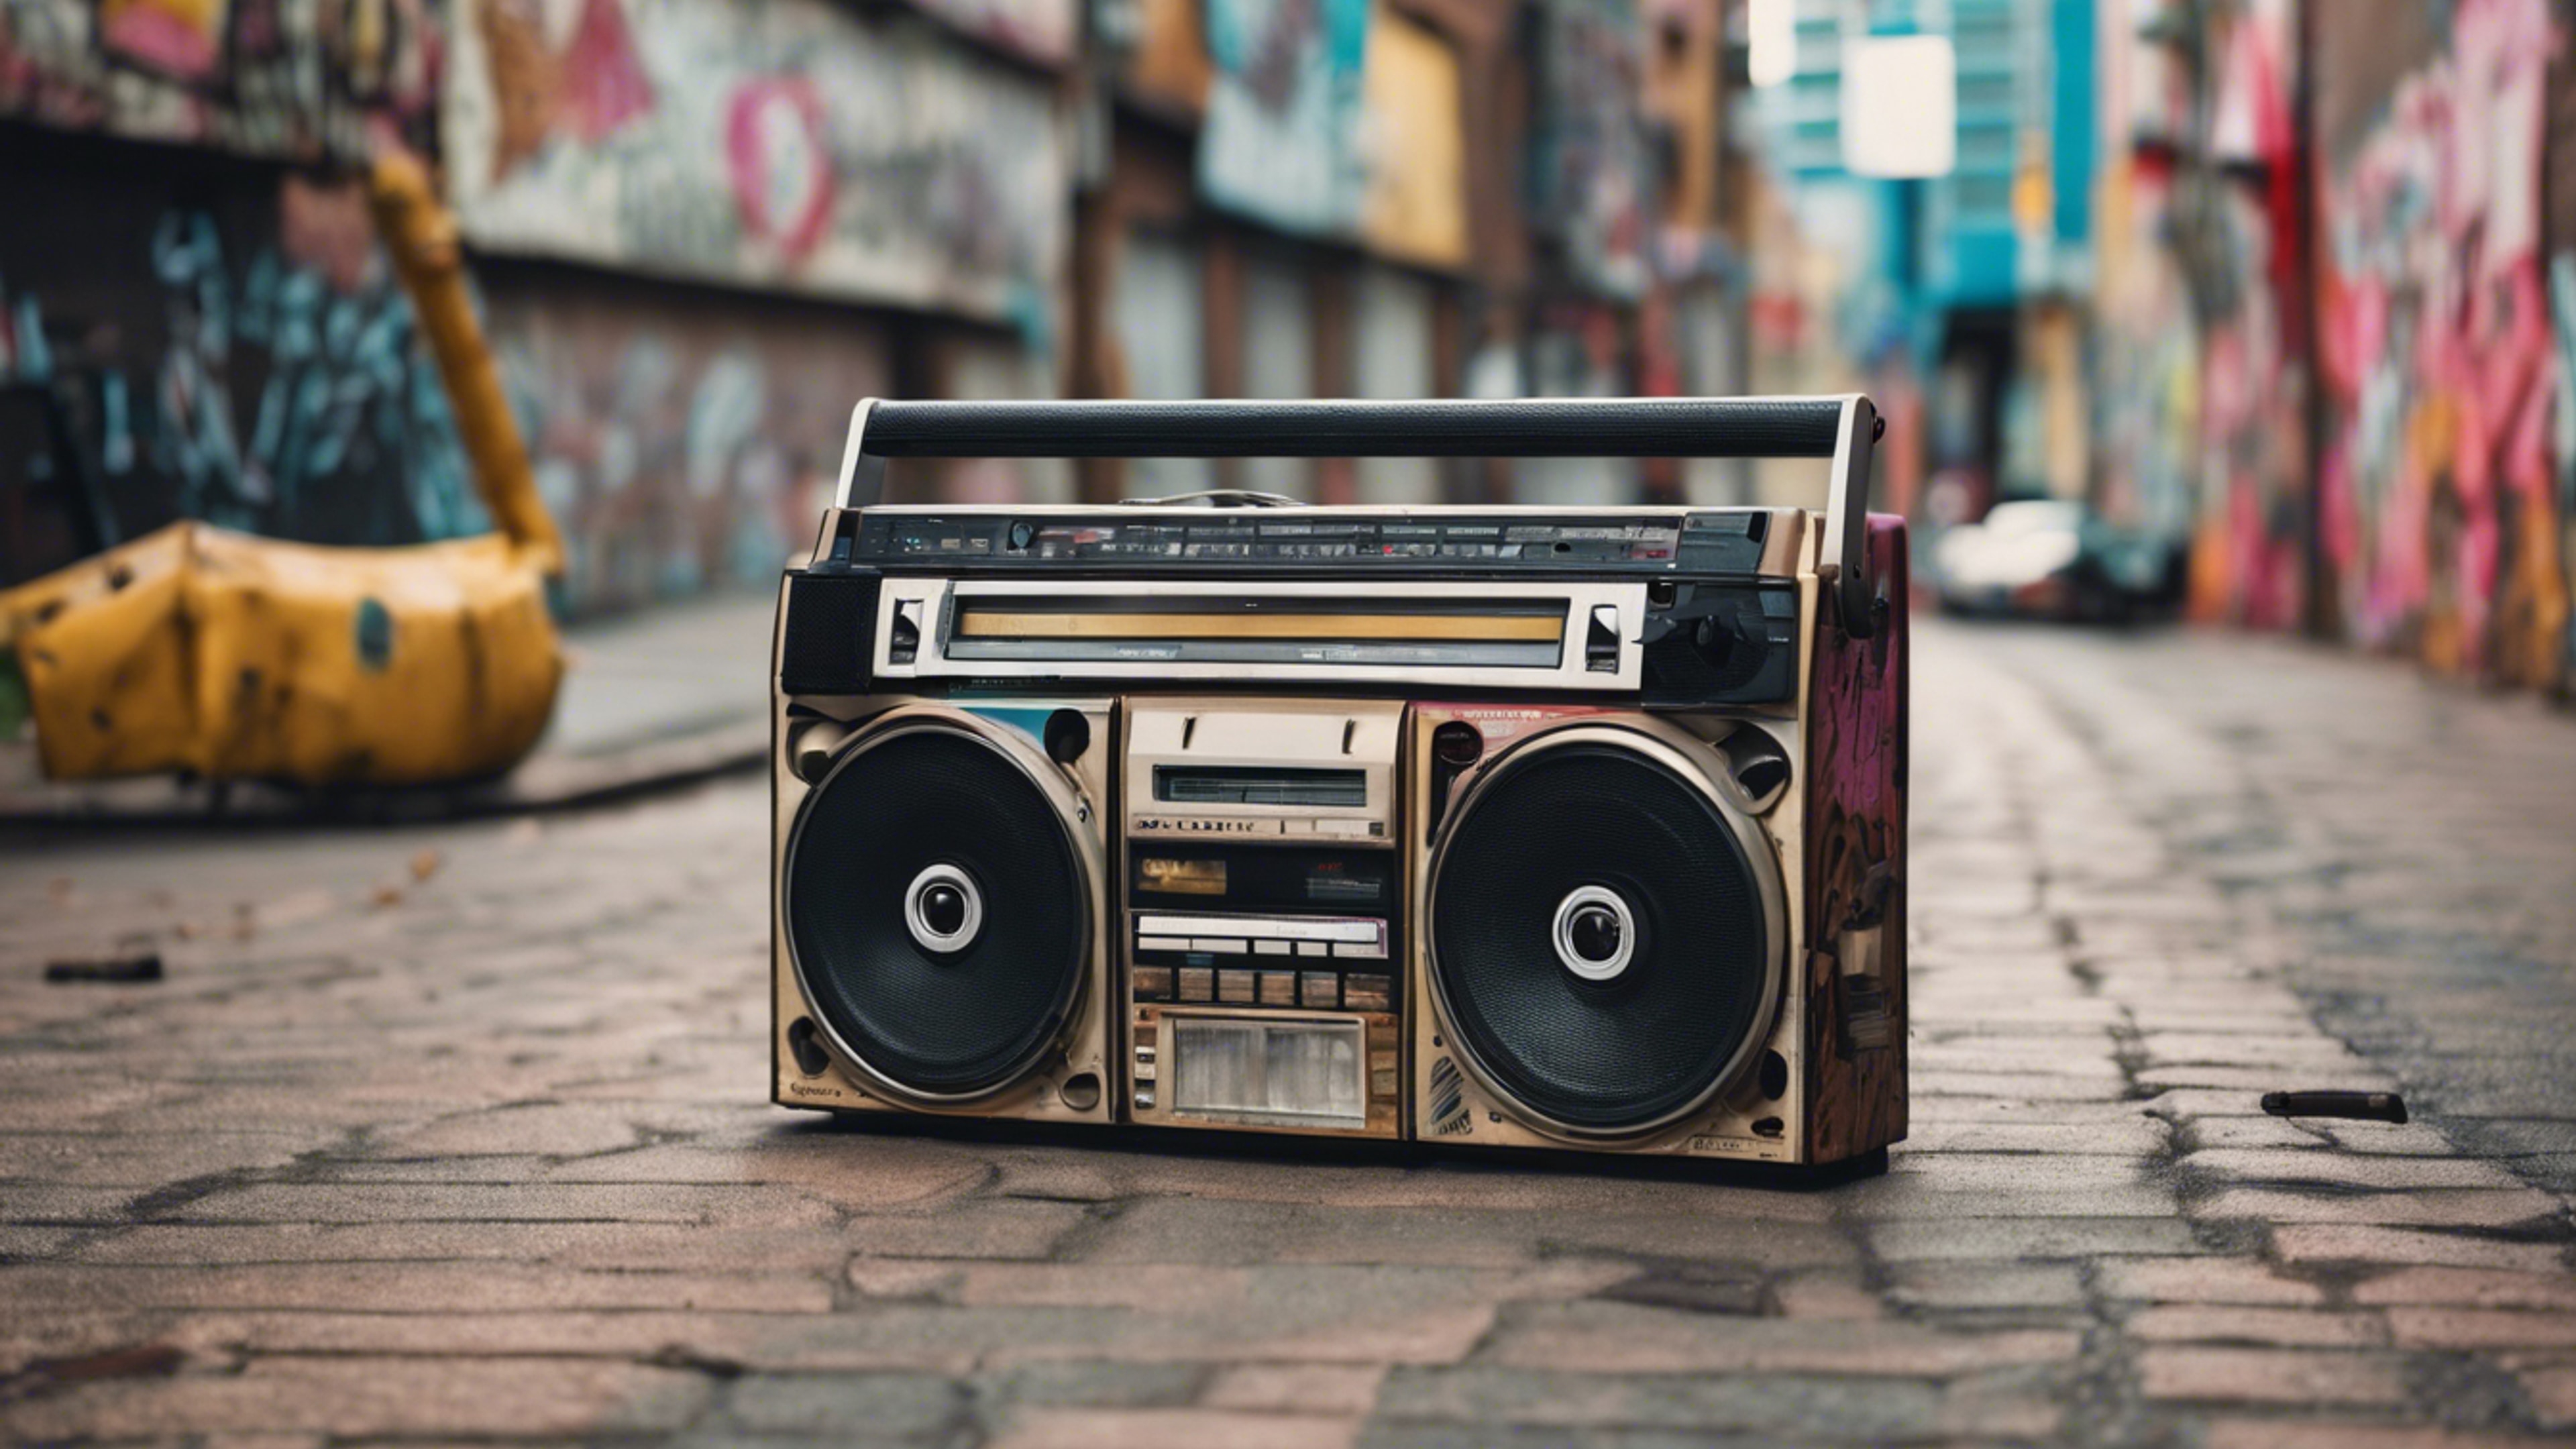 An old school 80s boombox playing cassette tapes on a graffitied street. Валлпапер[63e13512f9e44708b5c0]